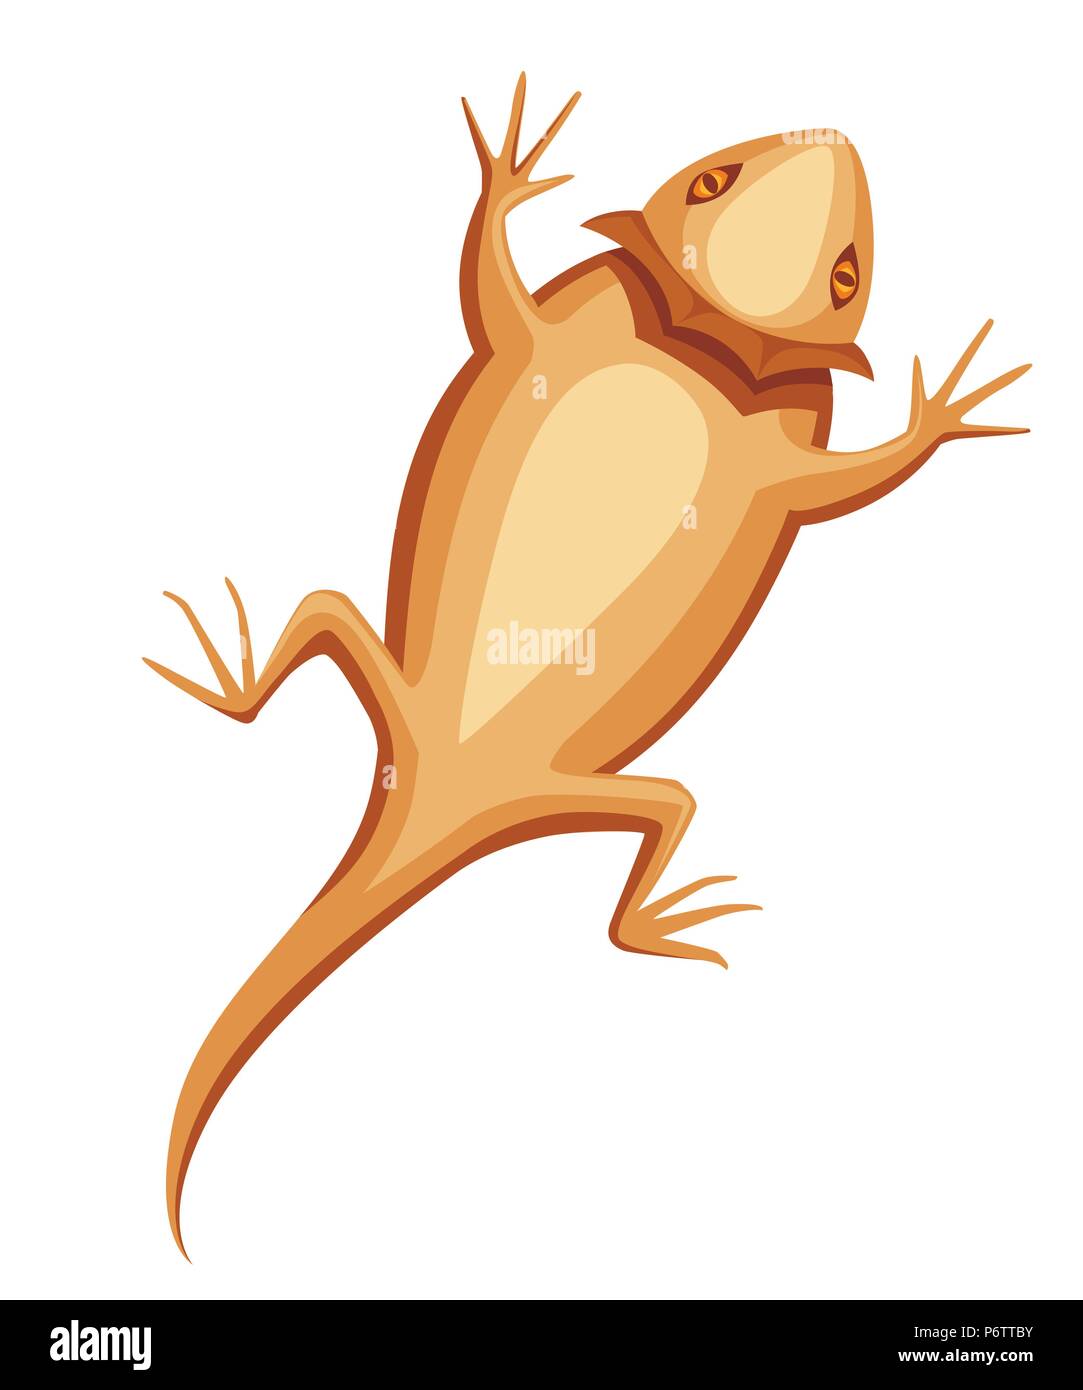 Flat bearded dragon. Small brown lizard. Central bearded dragon logo design, flat icon. Vector illustration isolated on white background. Stock Vector